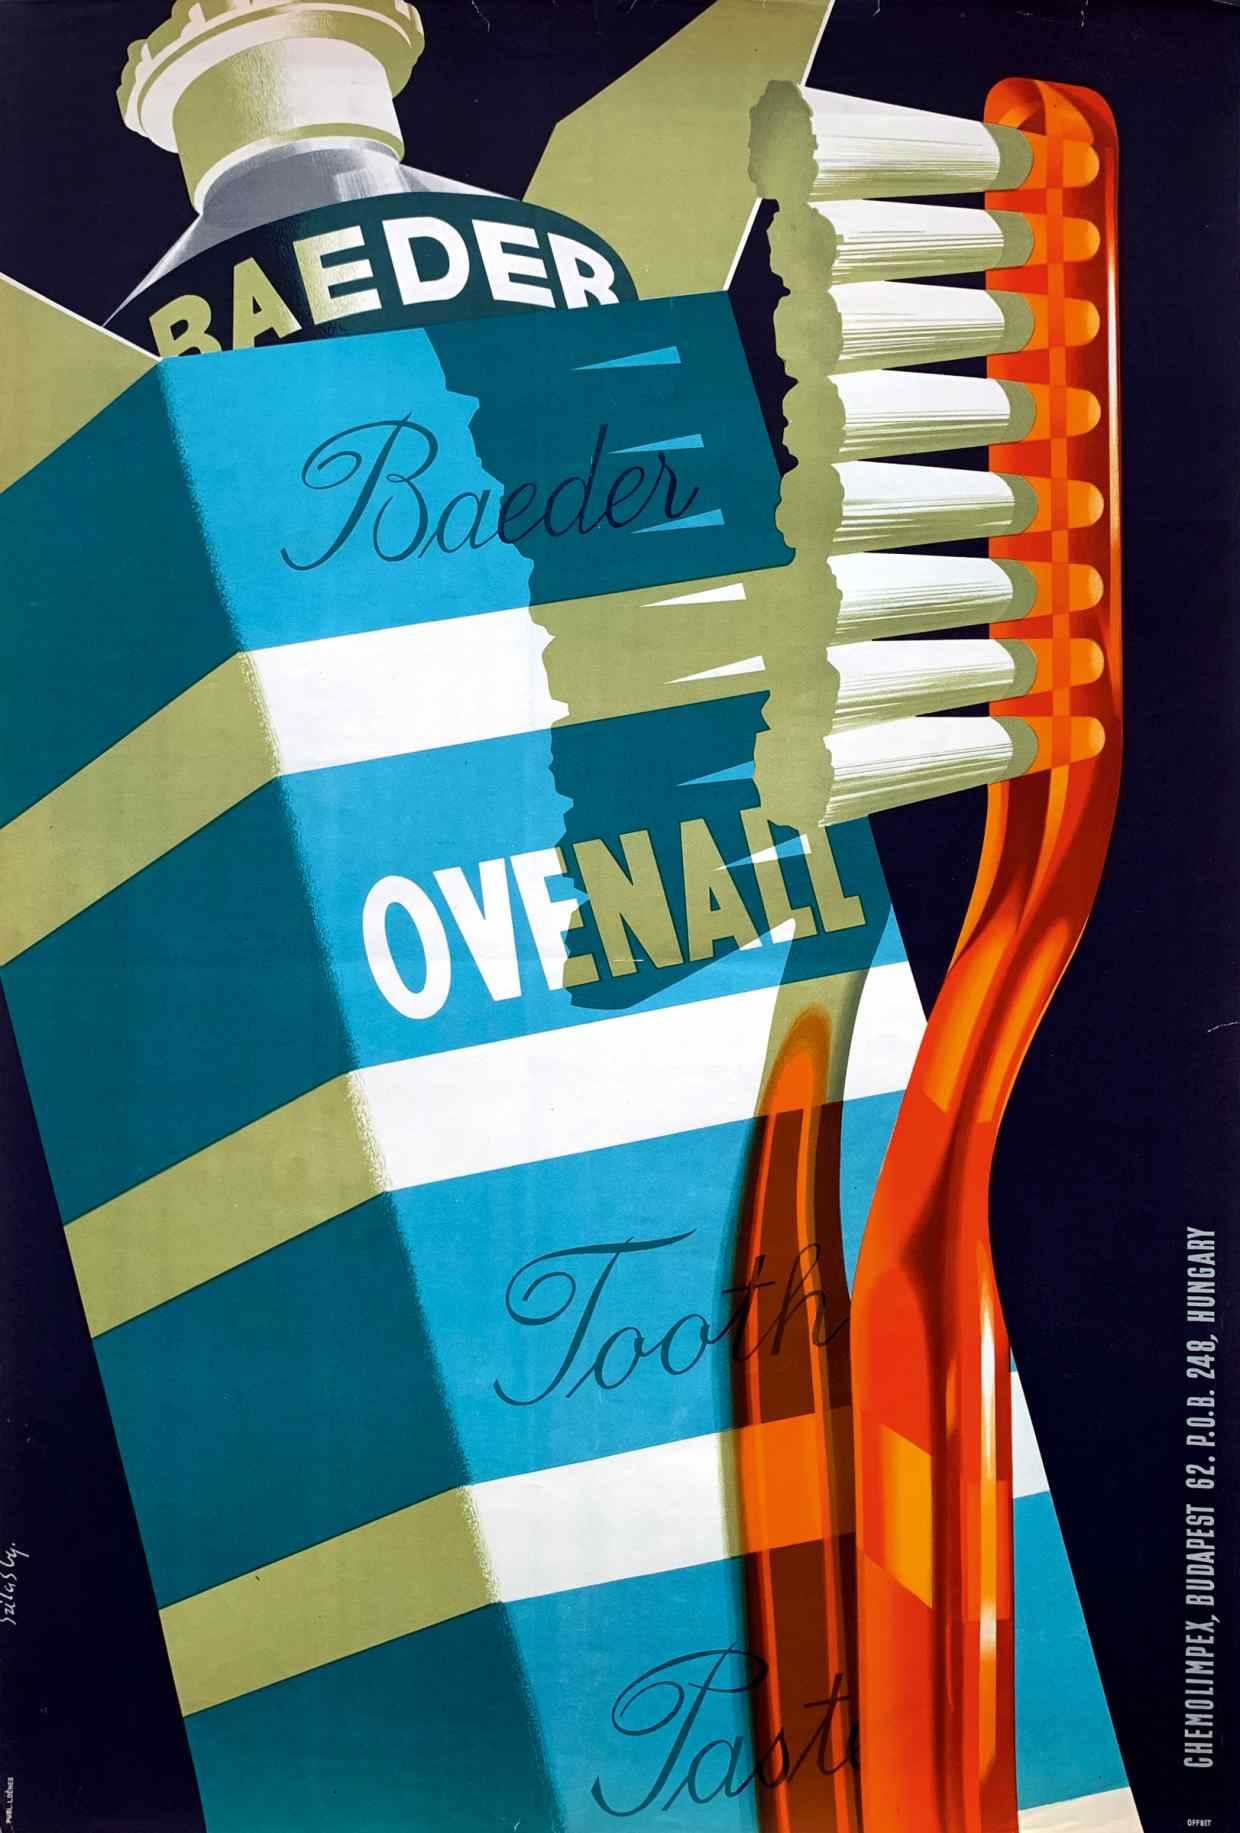 1958 Gyozo Szilas Ovenall Baeder toothpaste poster, $8,000, from Budapest Poster Gallery